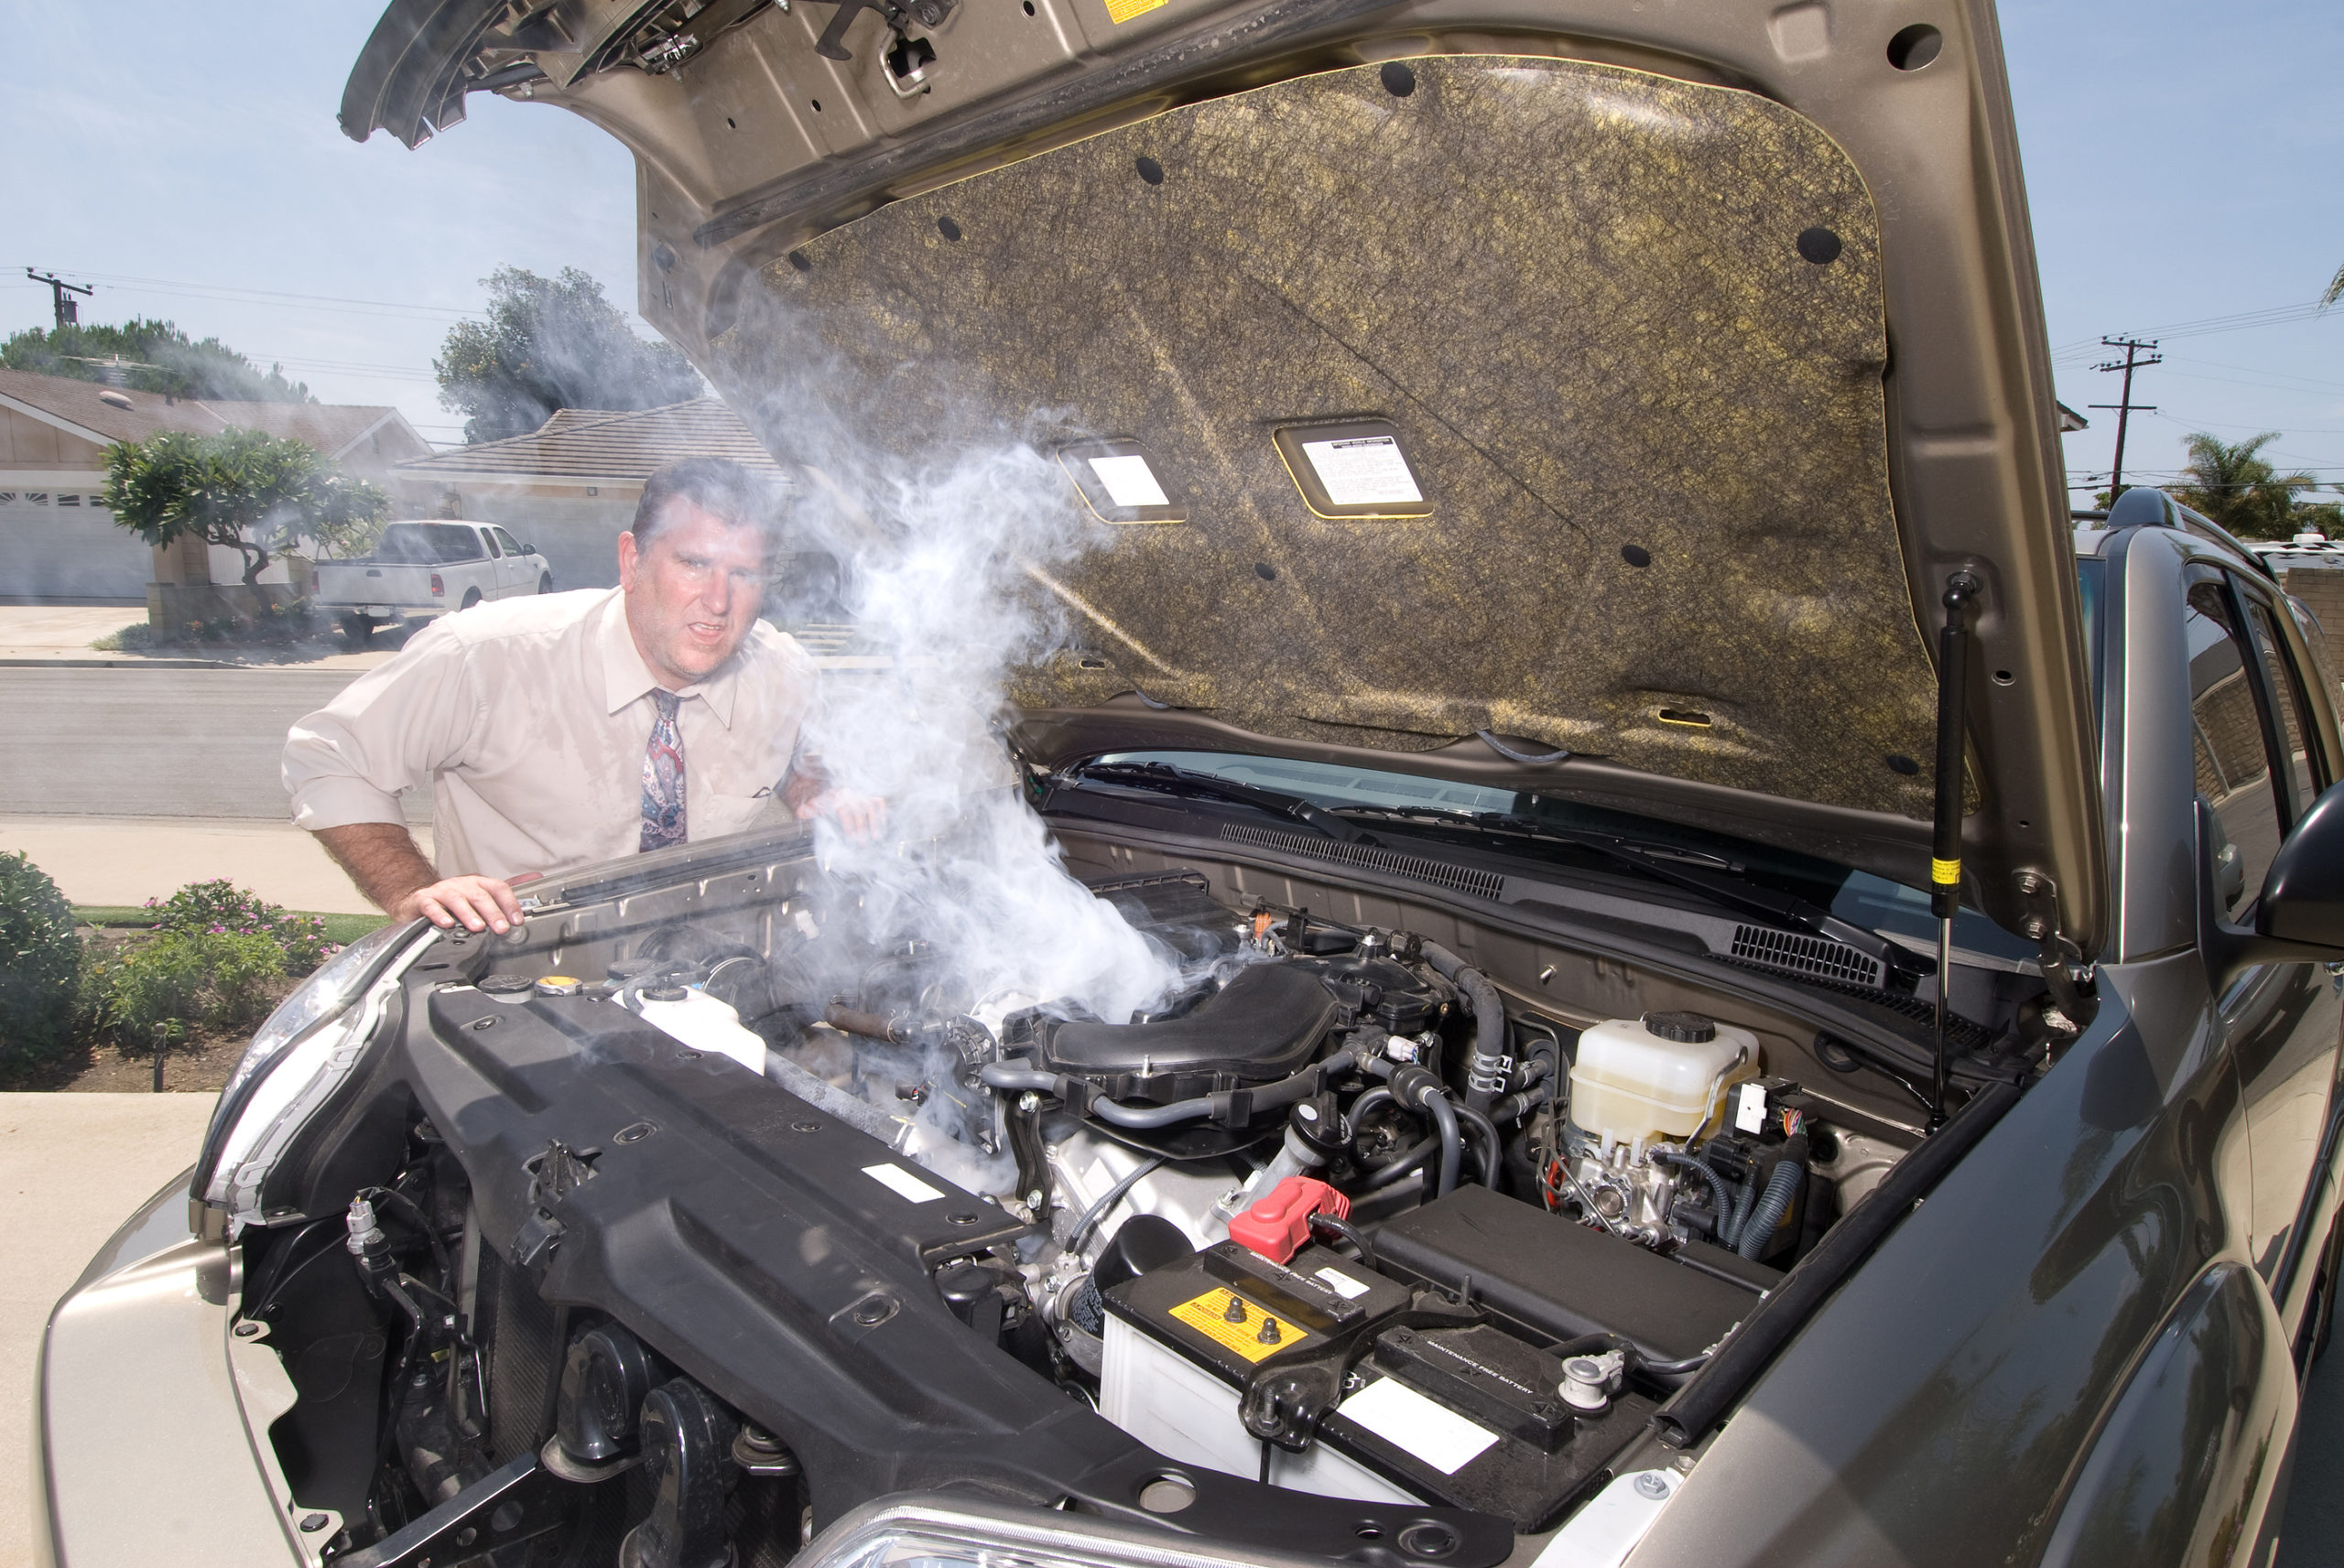 We Pay Cash for Overheated Cars! Give Us a Call Today!